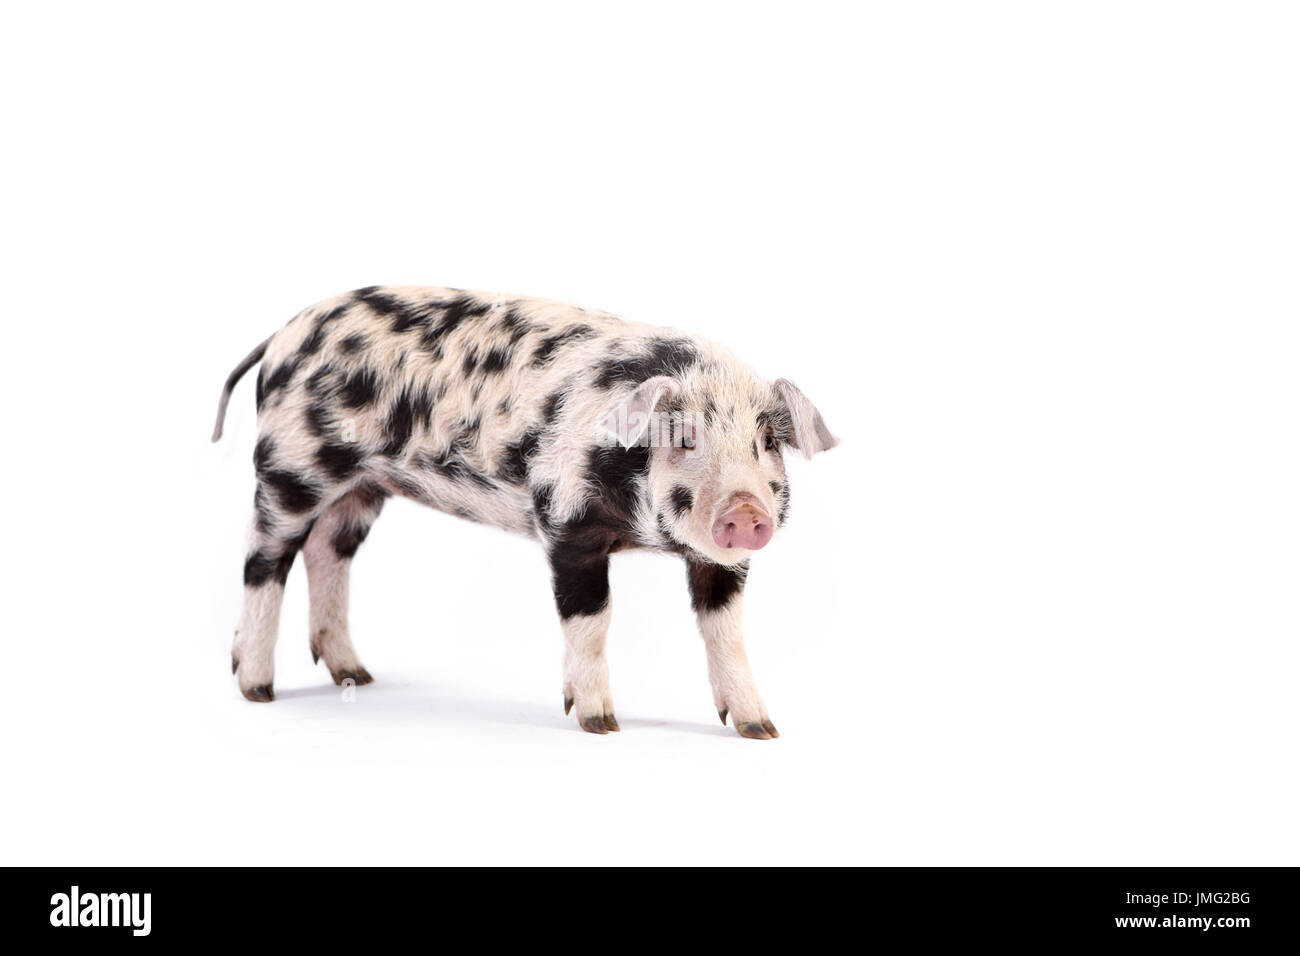 Turopolje Pig. Piglet standing. Studio picture against a white background. Germany Stock Photo